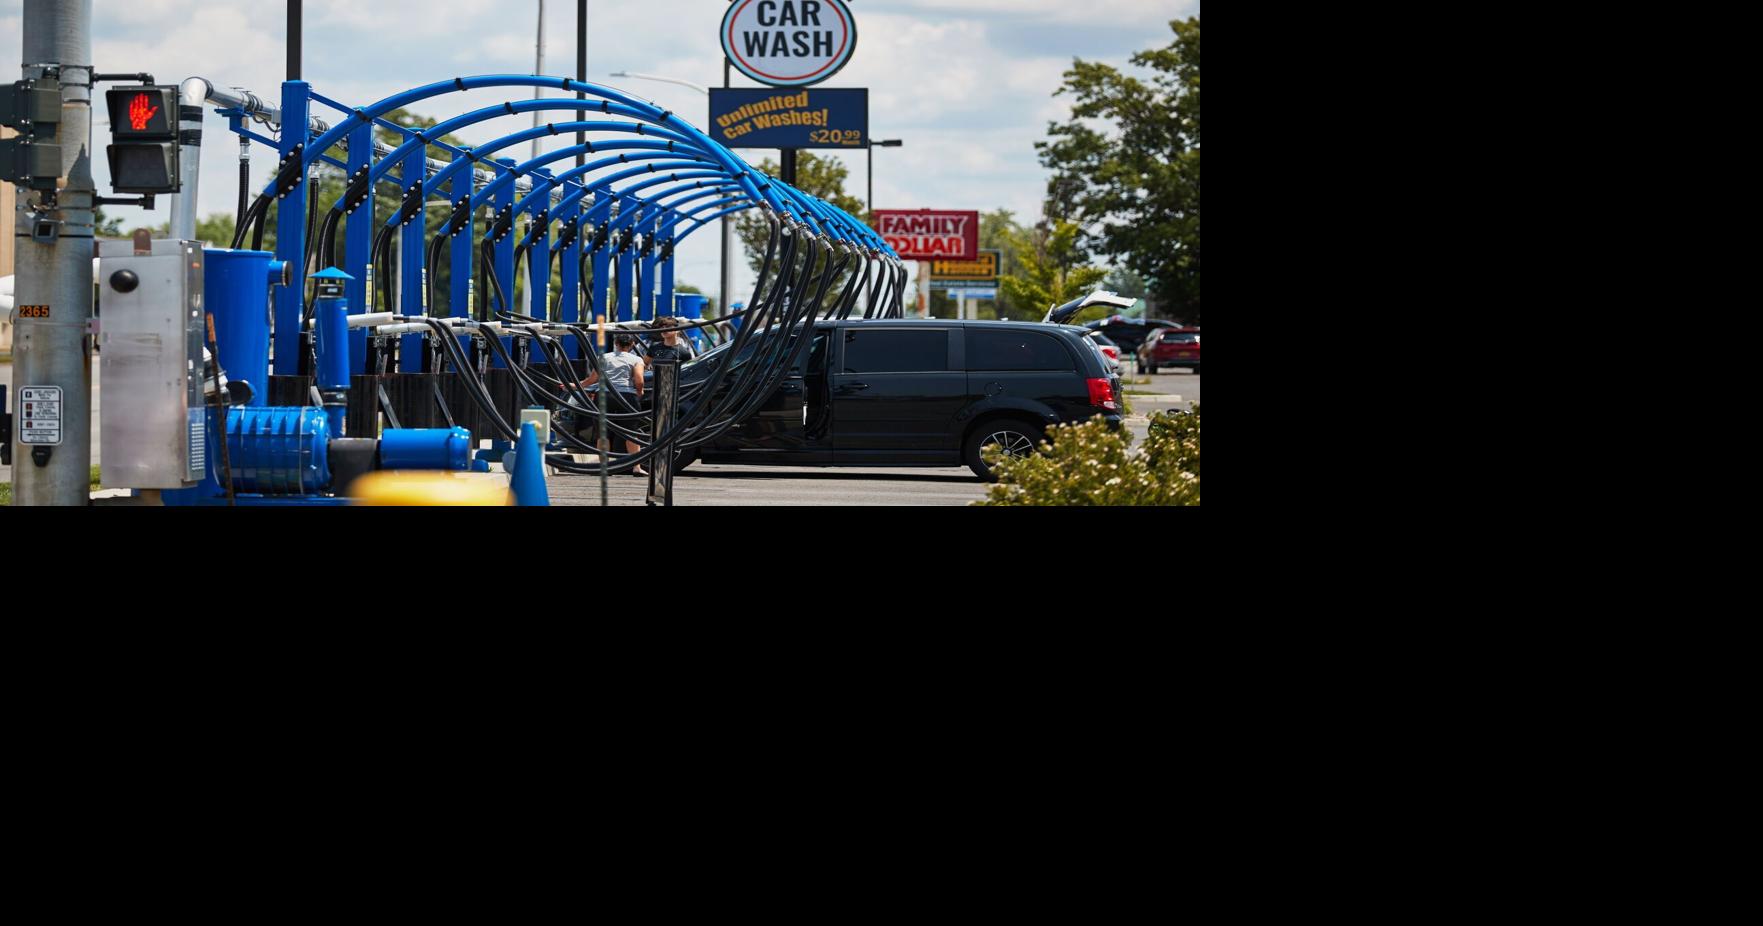 Delta Sonic Locations  Find Your Closest Car Wash, Oil Change, Detailing  Shop and More